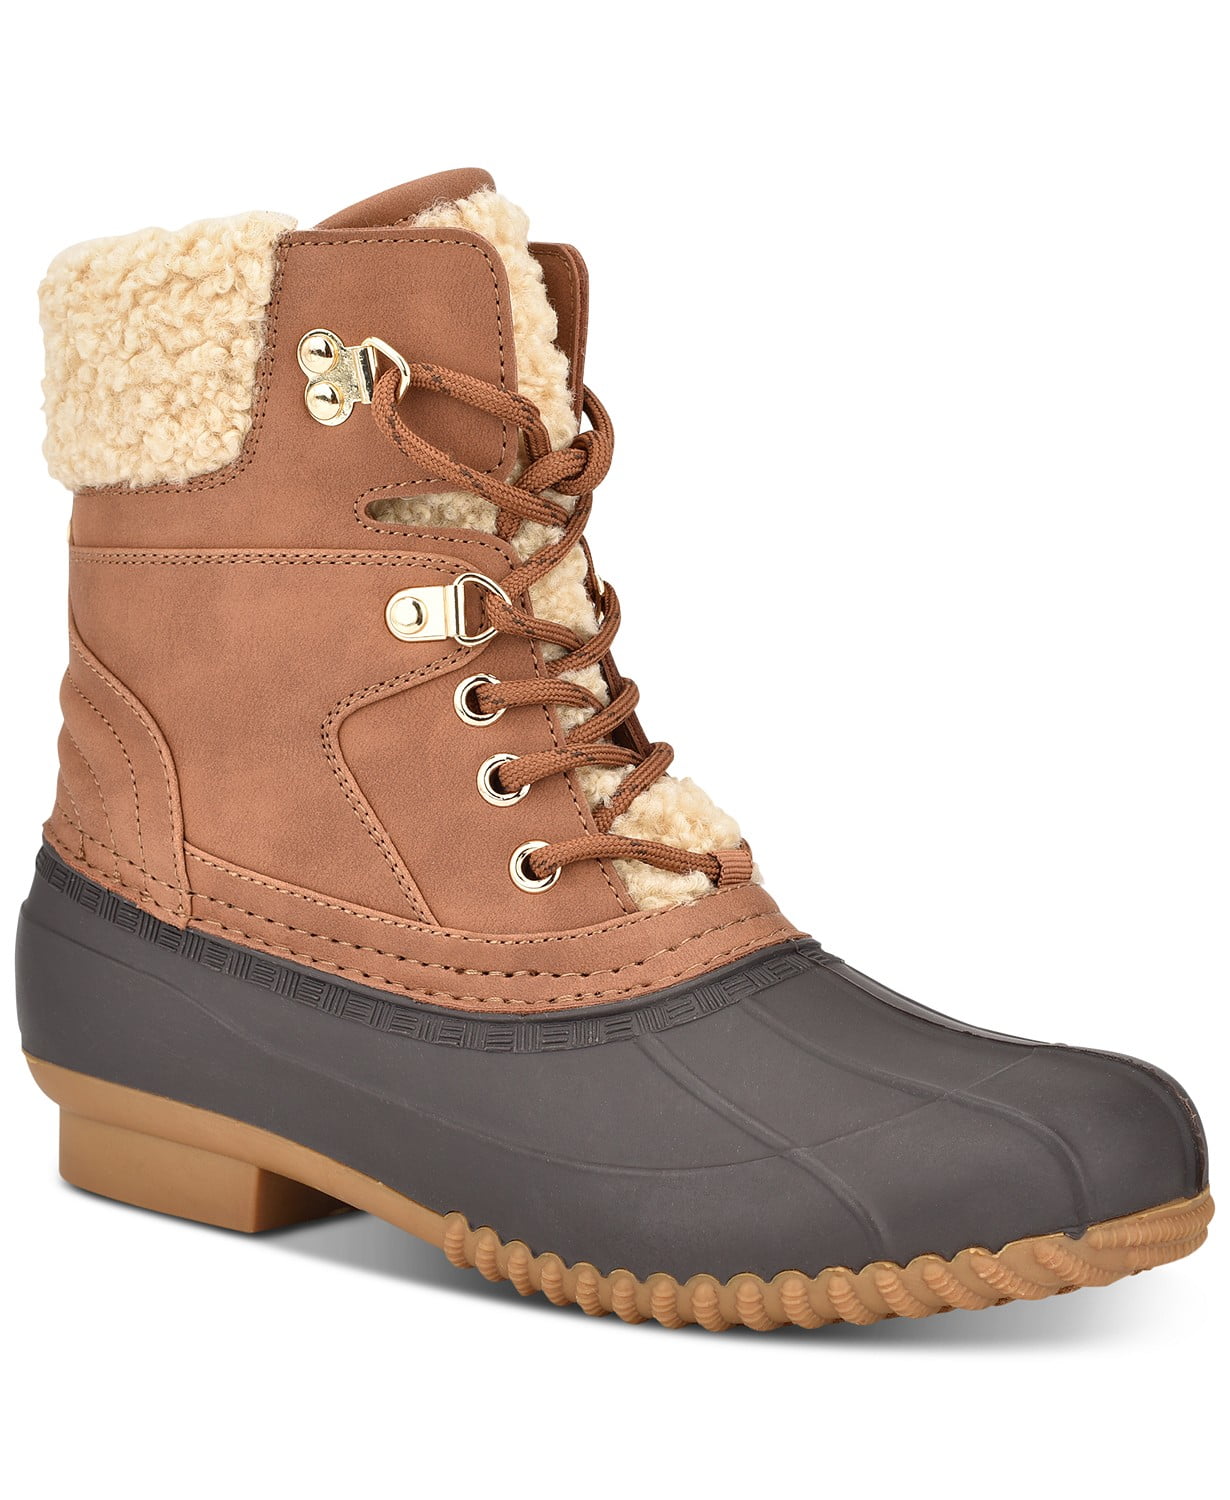 woocommerce-673321-2209615.cloudwaysapps.com-tommy-hilfiger-womens-brown-rainah-boots